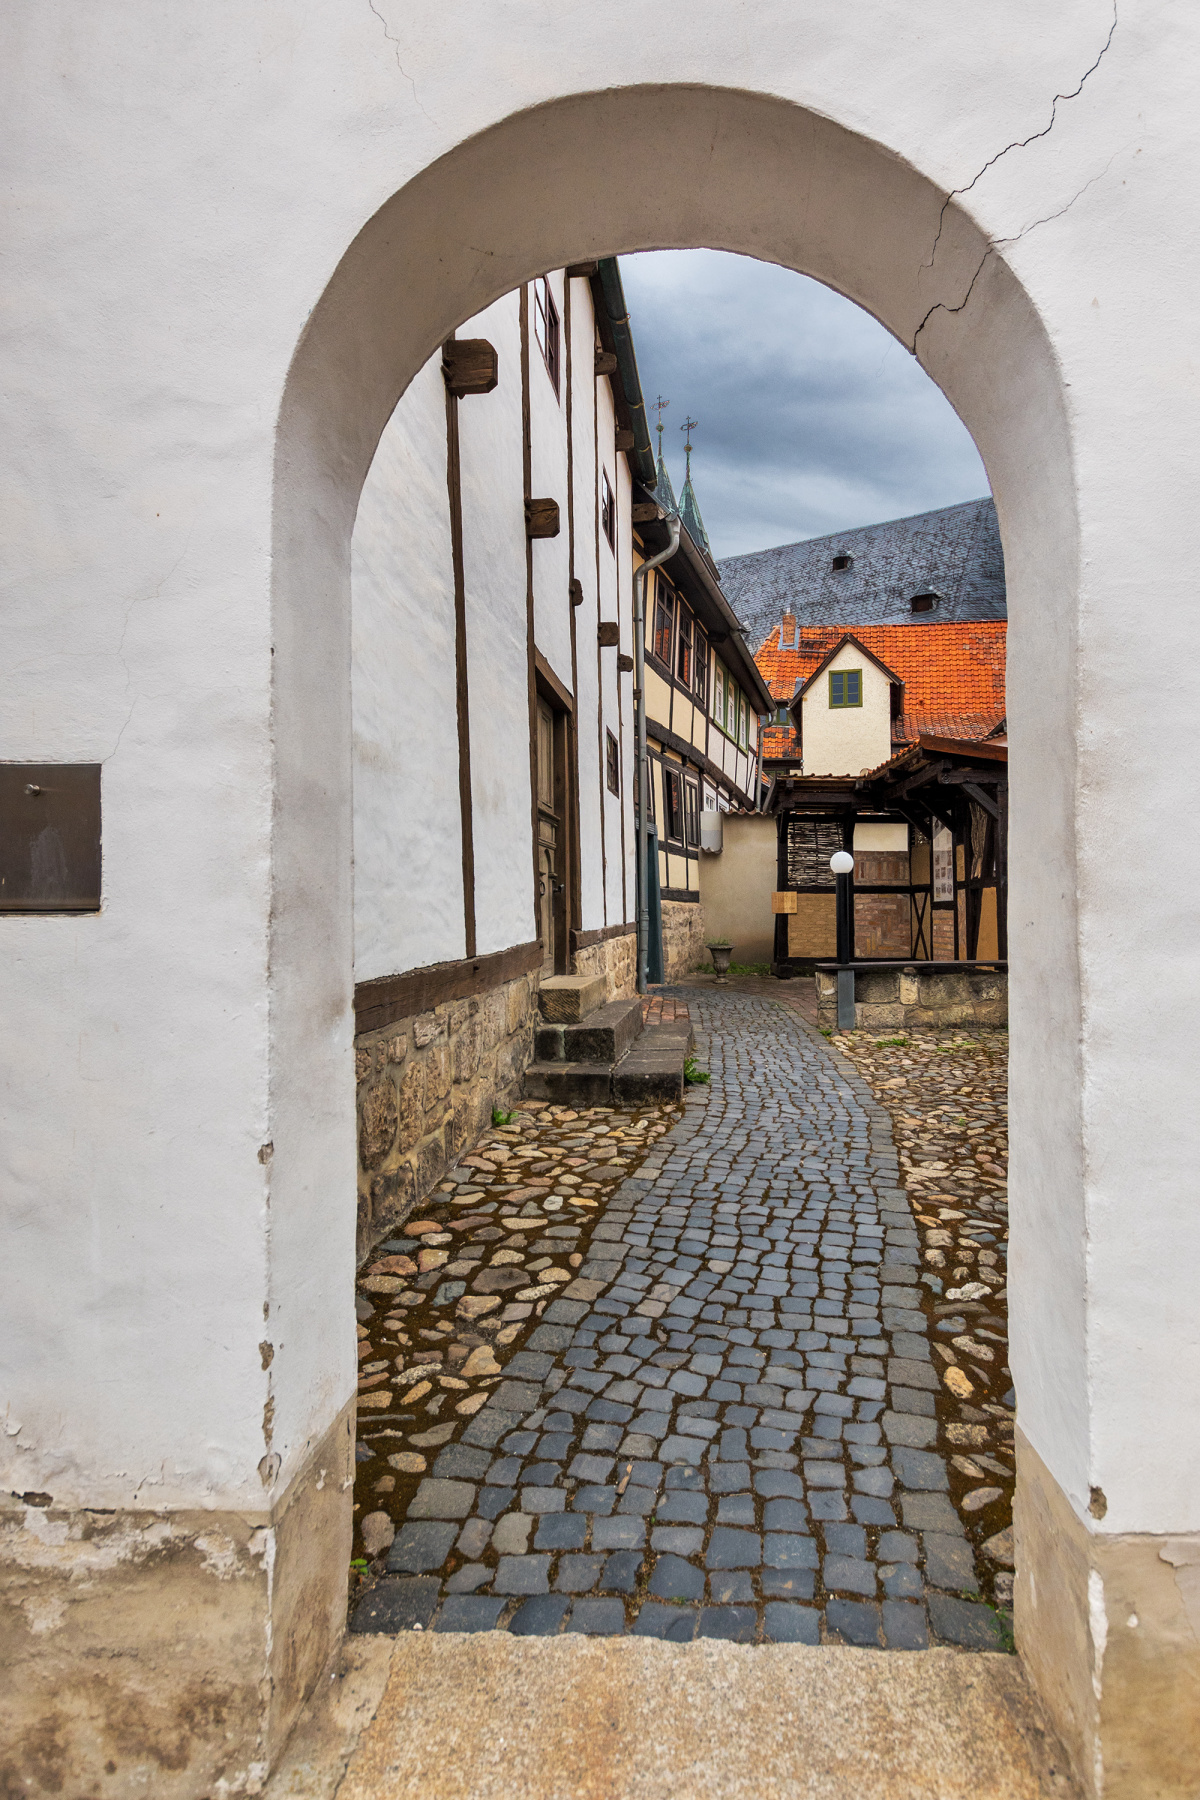 The Oldest House in Germany